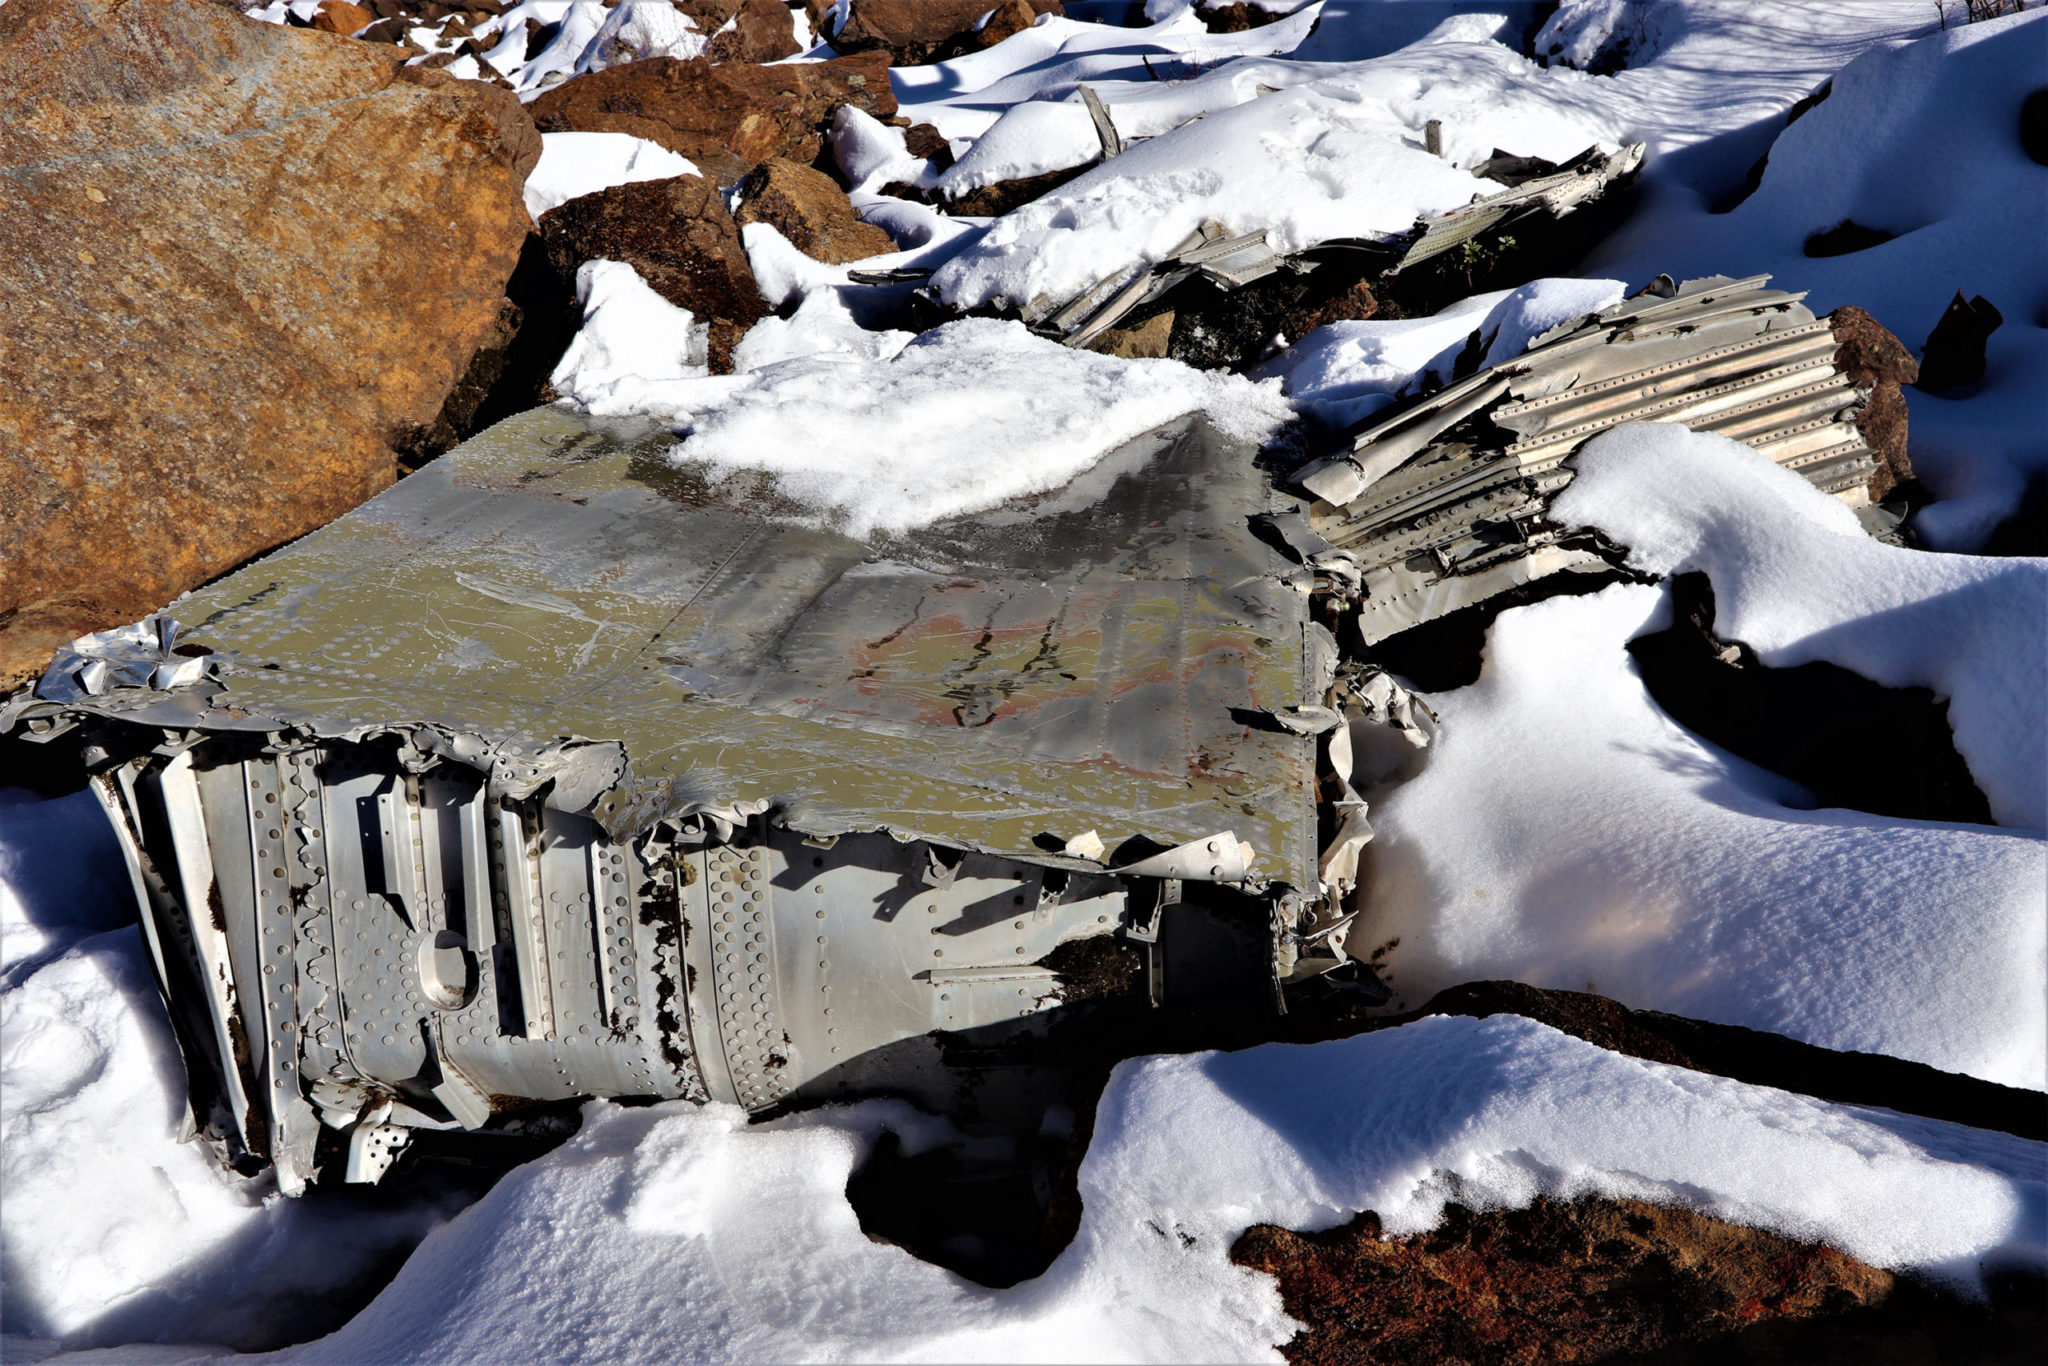 His Dad’s Plane Crashed Going “Over the Hump” in 1945—and They Just Found the Wreckage